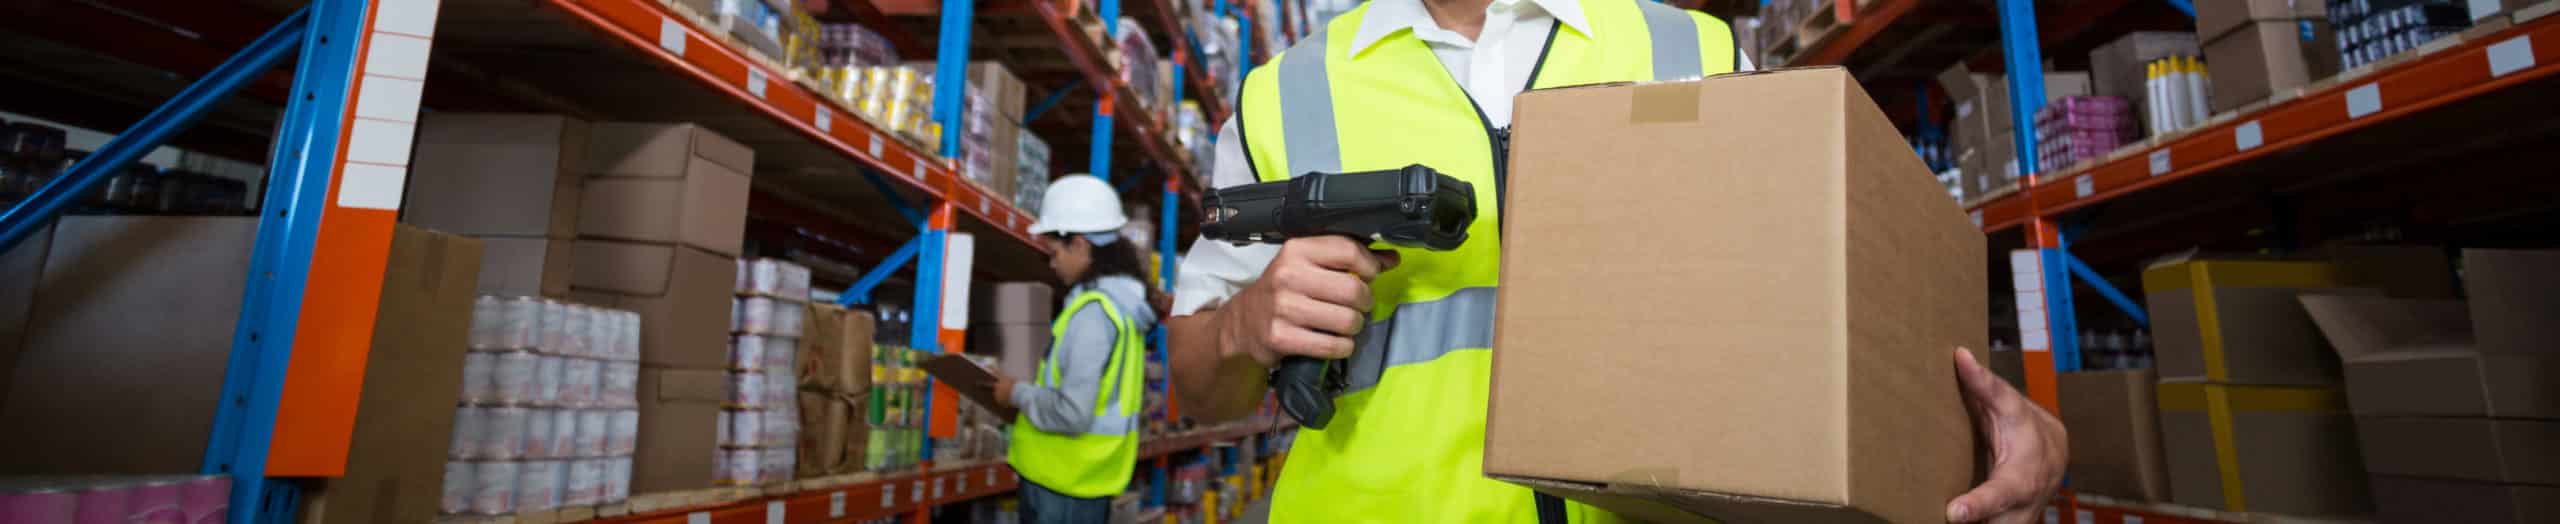 barcode scanning a box in a warehouse